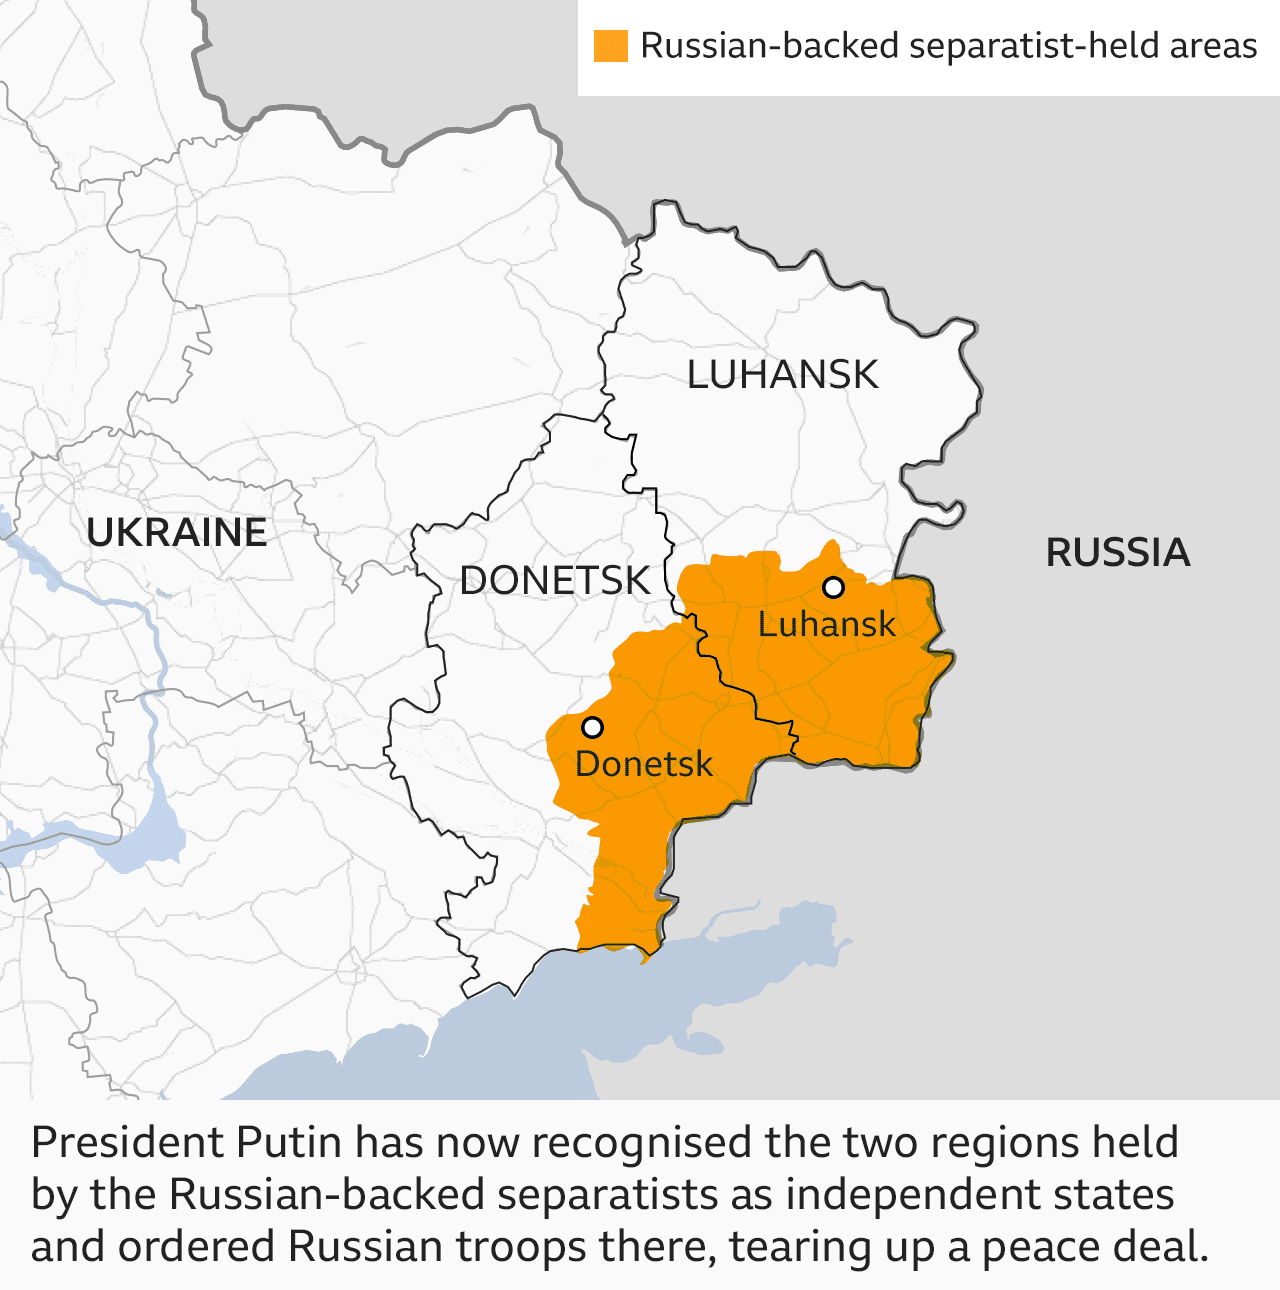 President Putin has now recognised the two regions held by the Russian-backed separatists as independent states and ordered Russian troops there, tearing up a peace deal.